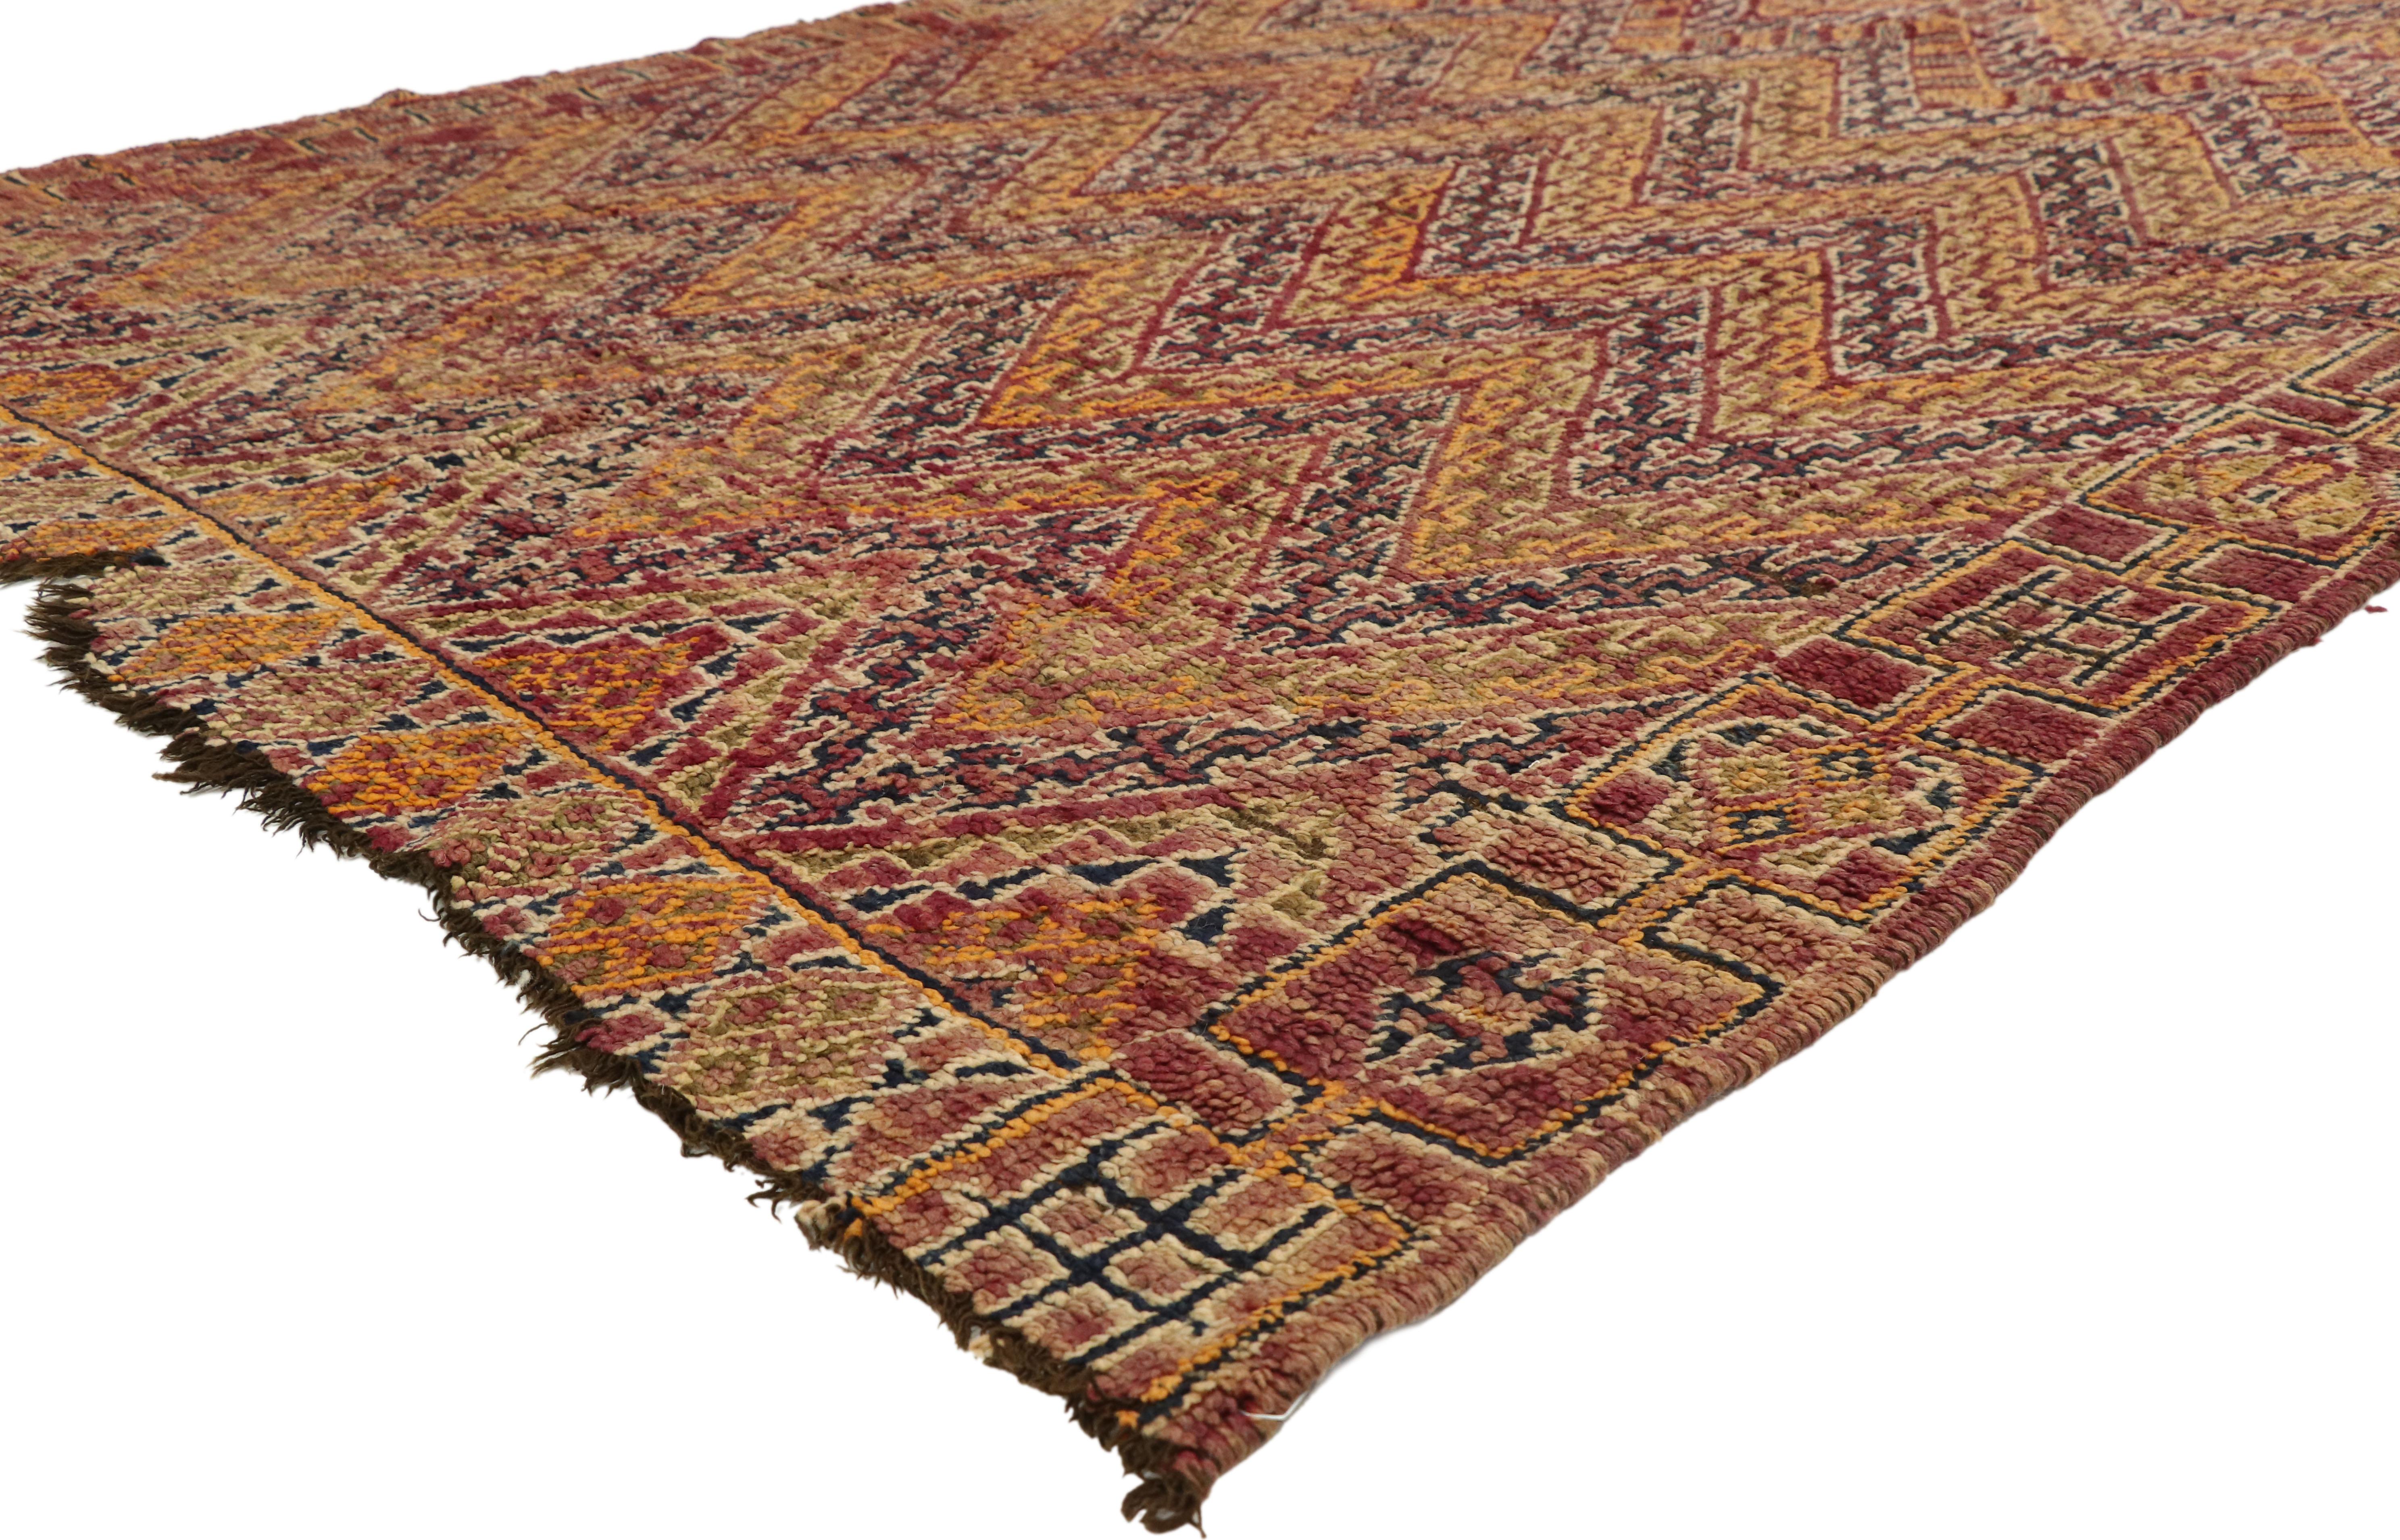 20958, vintage Berber Moroccan Zayane rug with Mid-Century Modern style 06'02 x 10'07. Saturated with good taste with a beguiling design aesthetic, this hand knotted wool vintage Berber Moroccan Zayane rug features repeating zigzag bands composed in